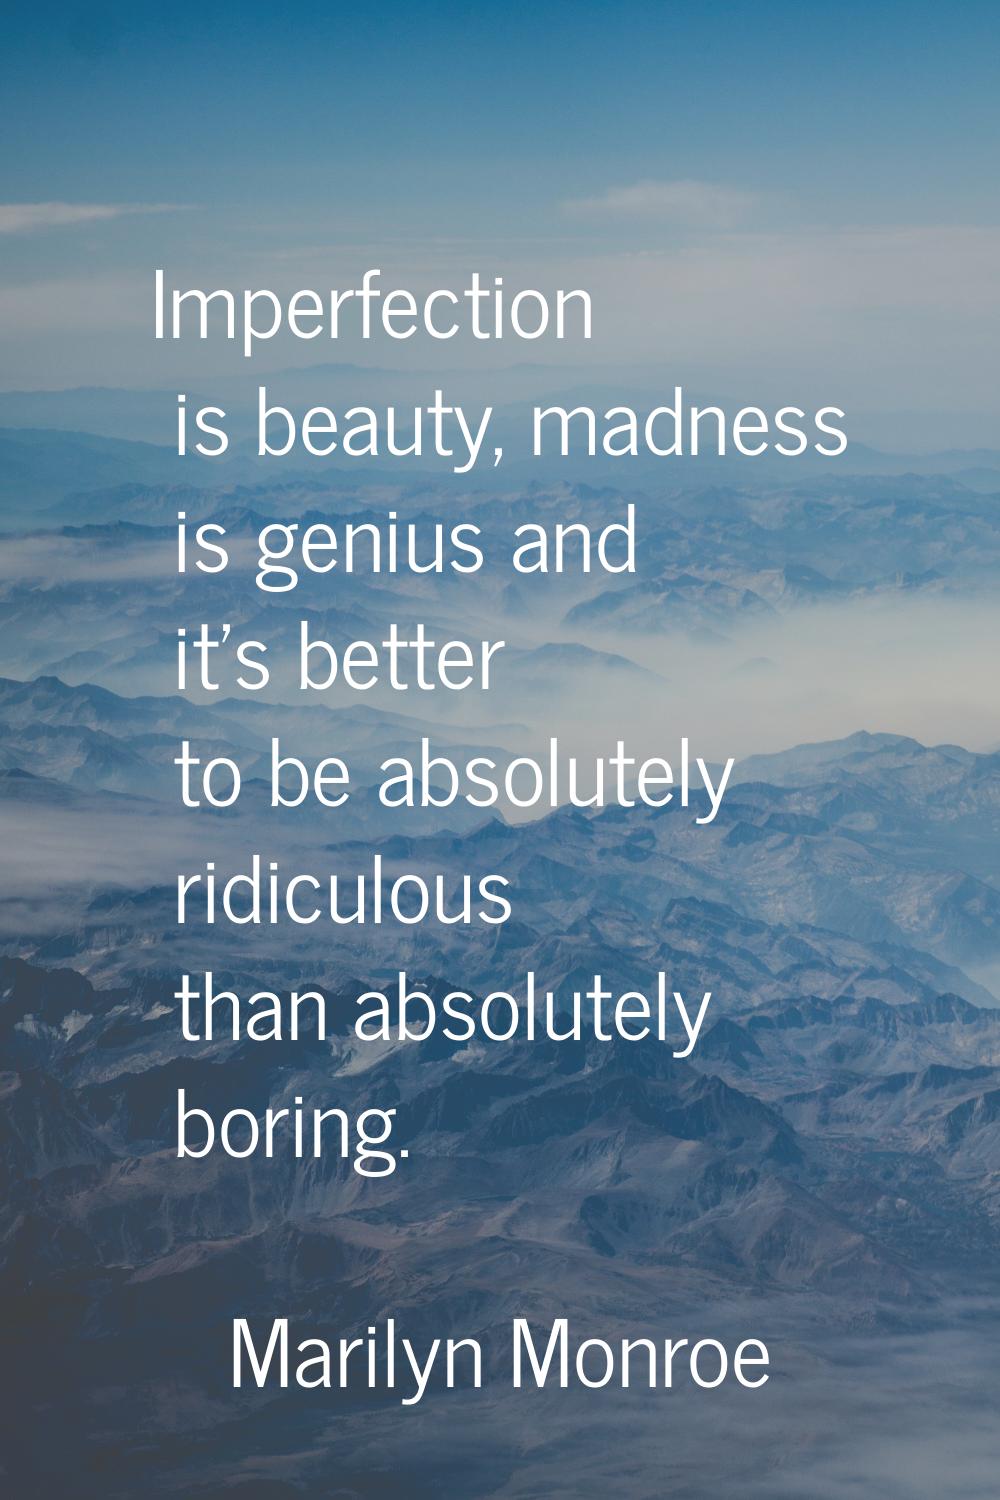 Imperfection is beauty, madness is genius and it's better to be absolutely ridiculous than absolute